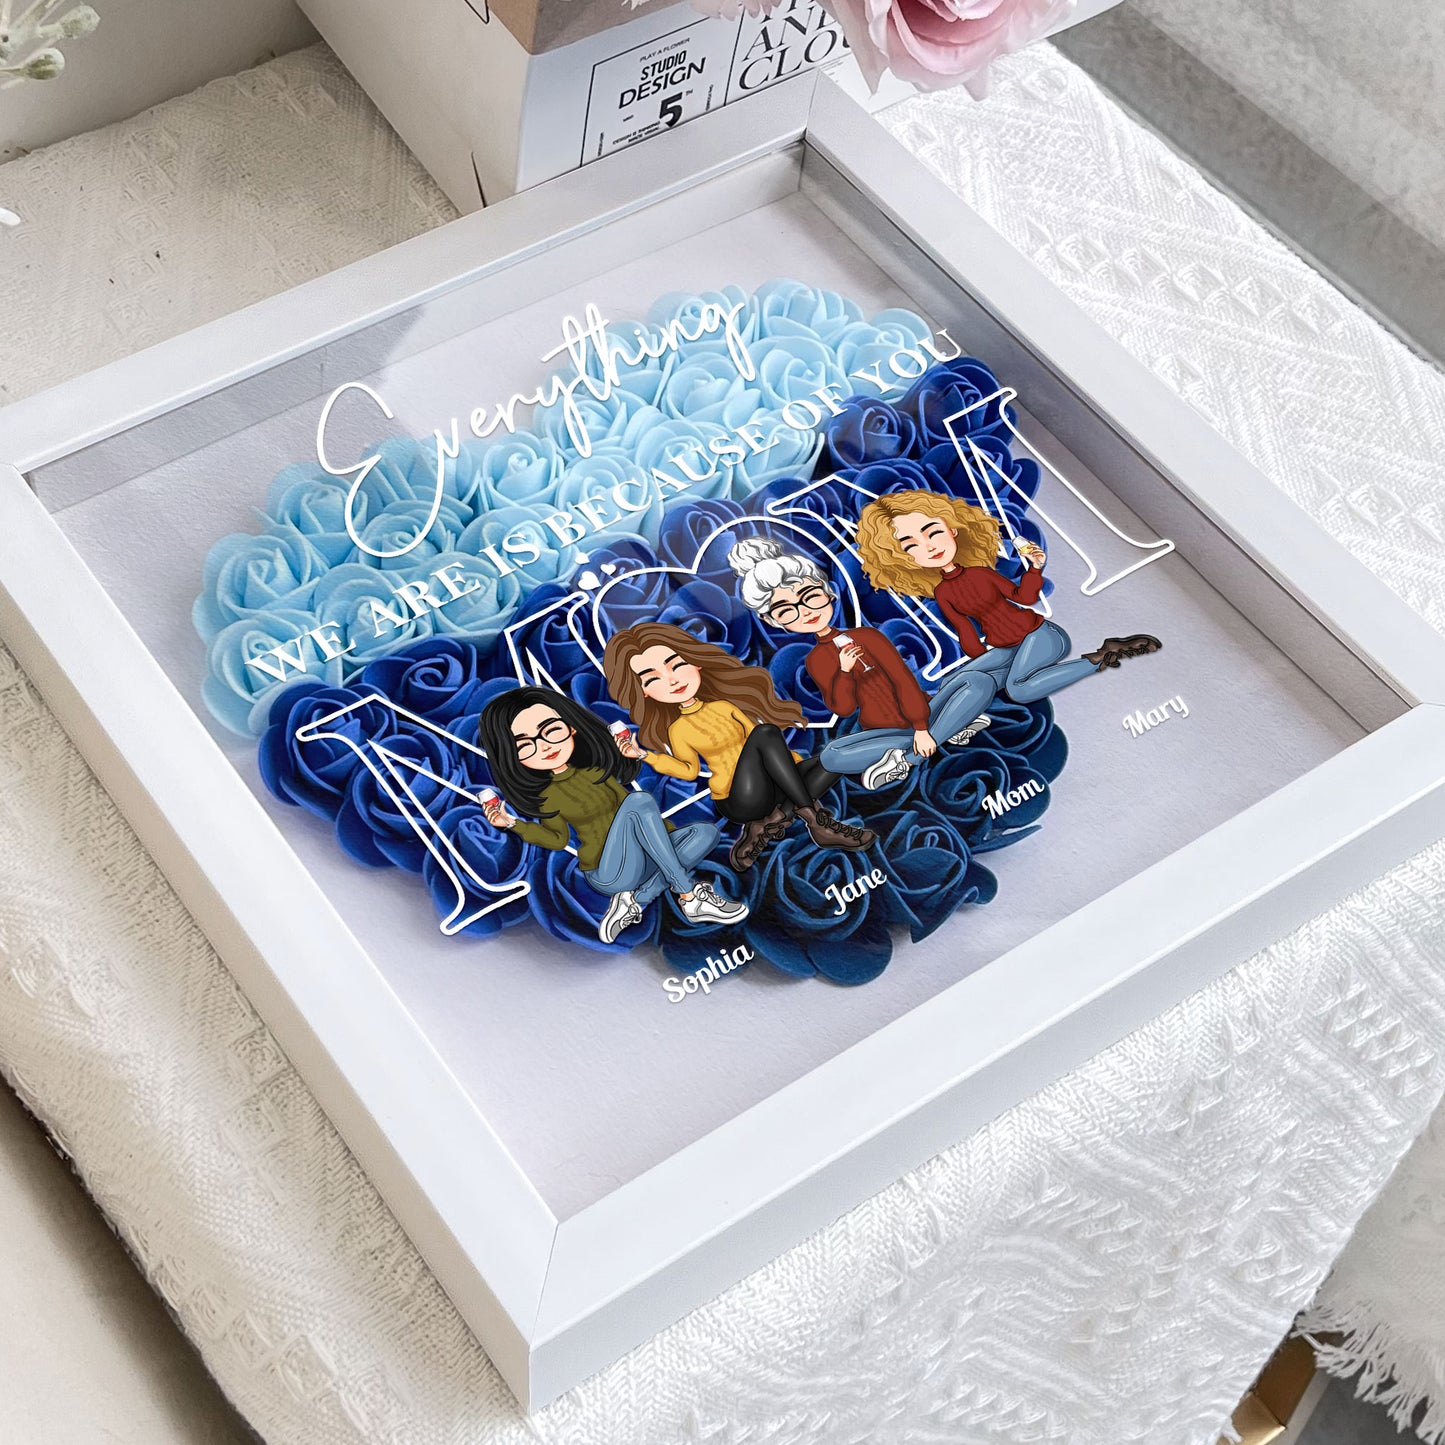 Everything We Are Is Because Of You - Personalized Flower Shadow Box